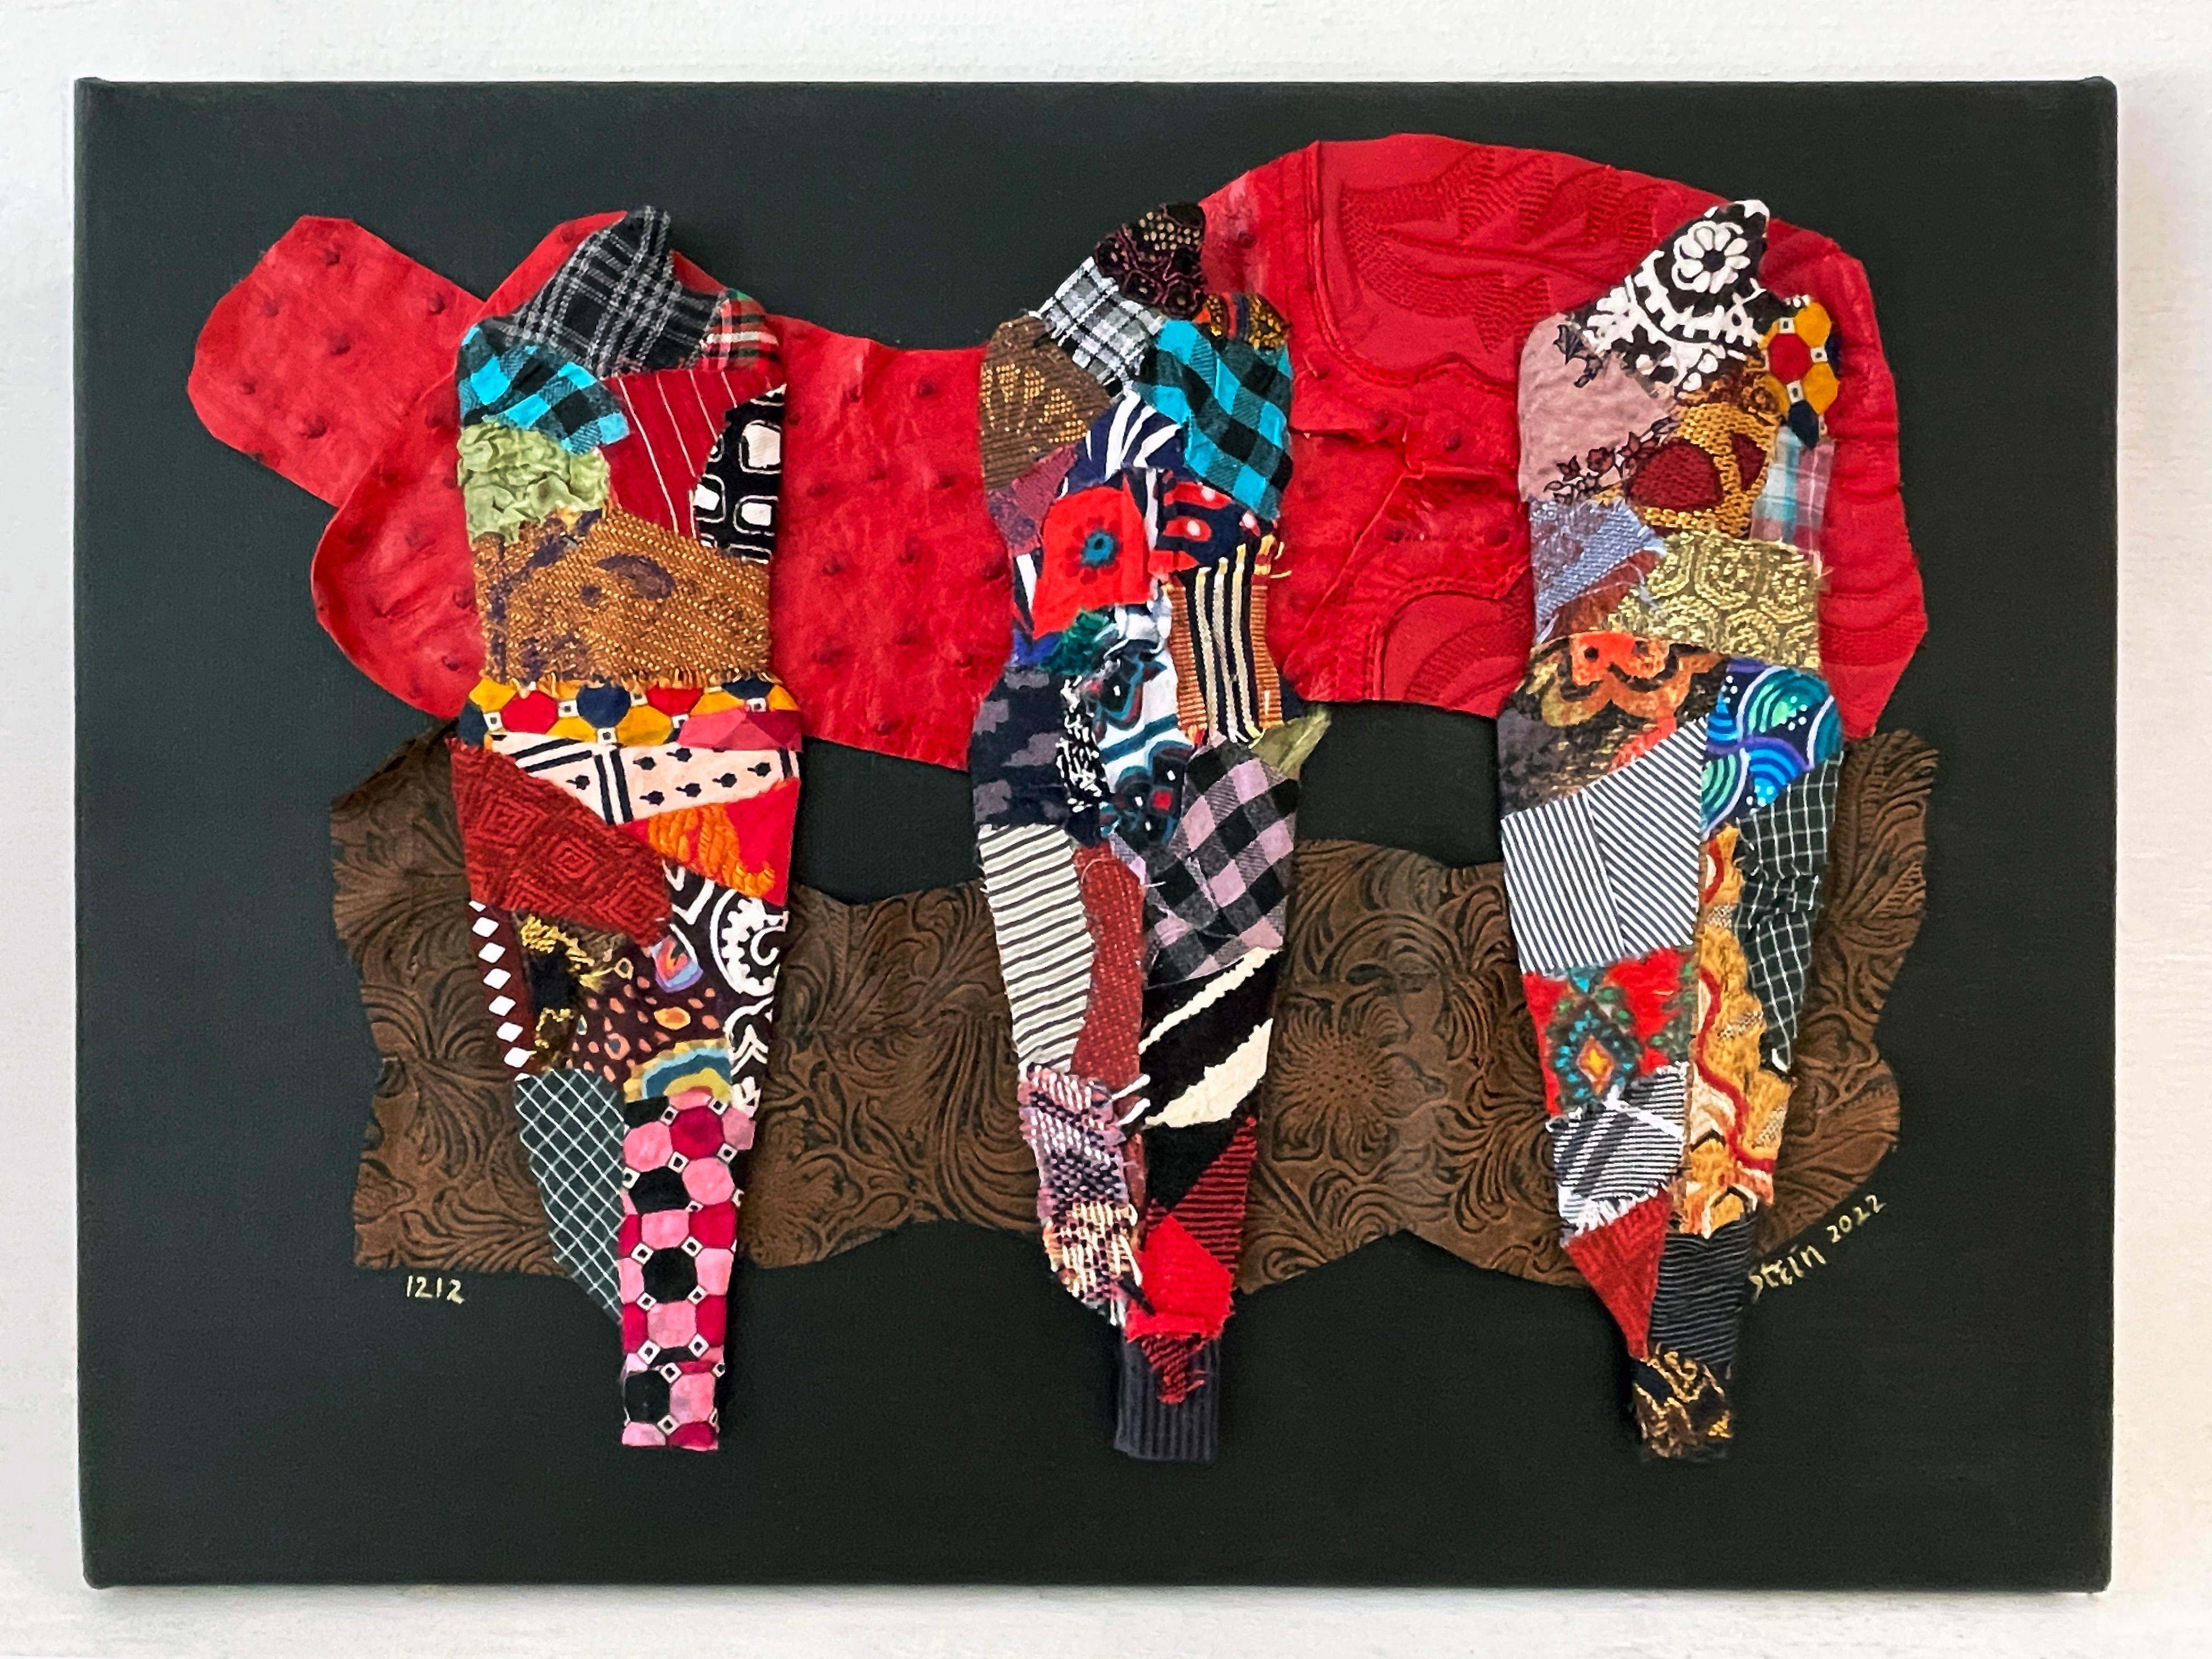 Linda Stein, 1212 - Contemporary Art 3D Mixed Media Fabric Sculptural Collage